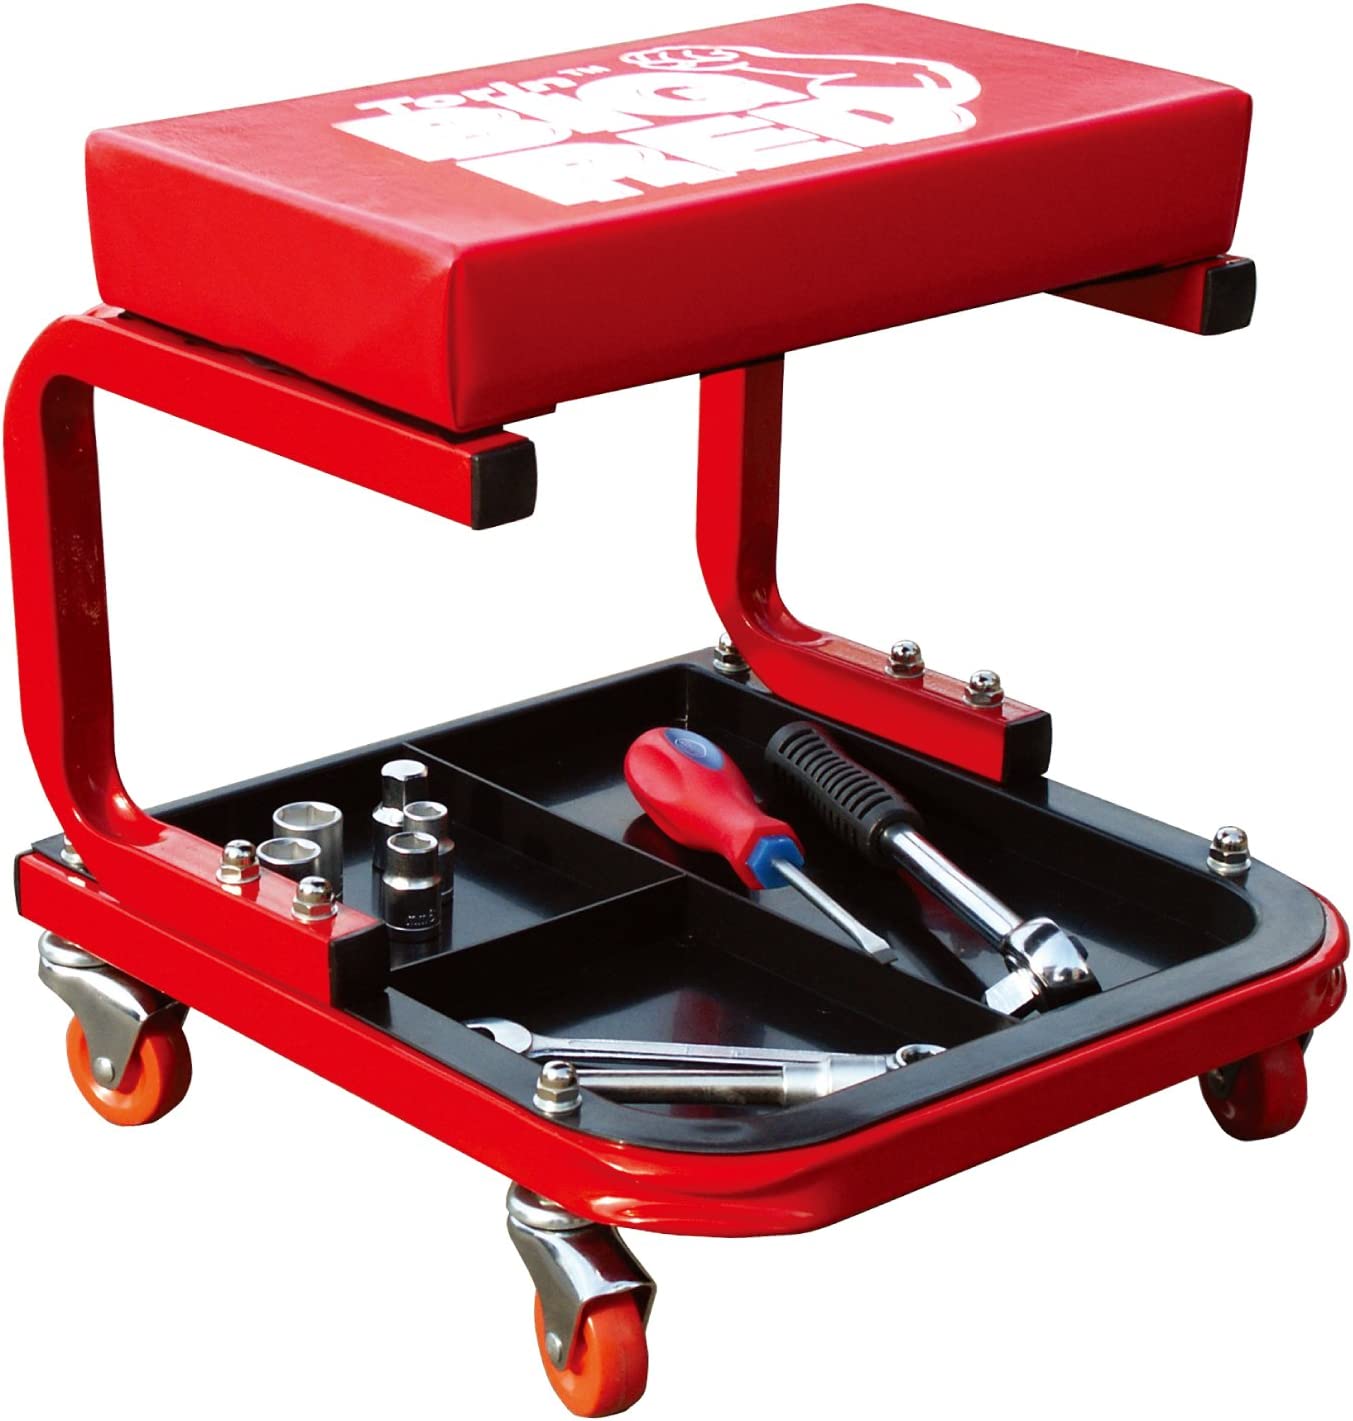 DNA Motoring Tools-00253 Adjustable Height Pneumatic Garage Seat Rolling Mechanic Stool with Tool Tray Storage